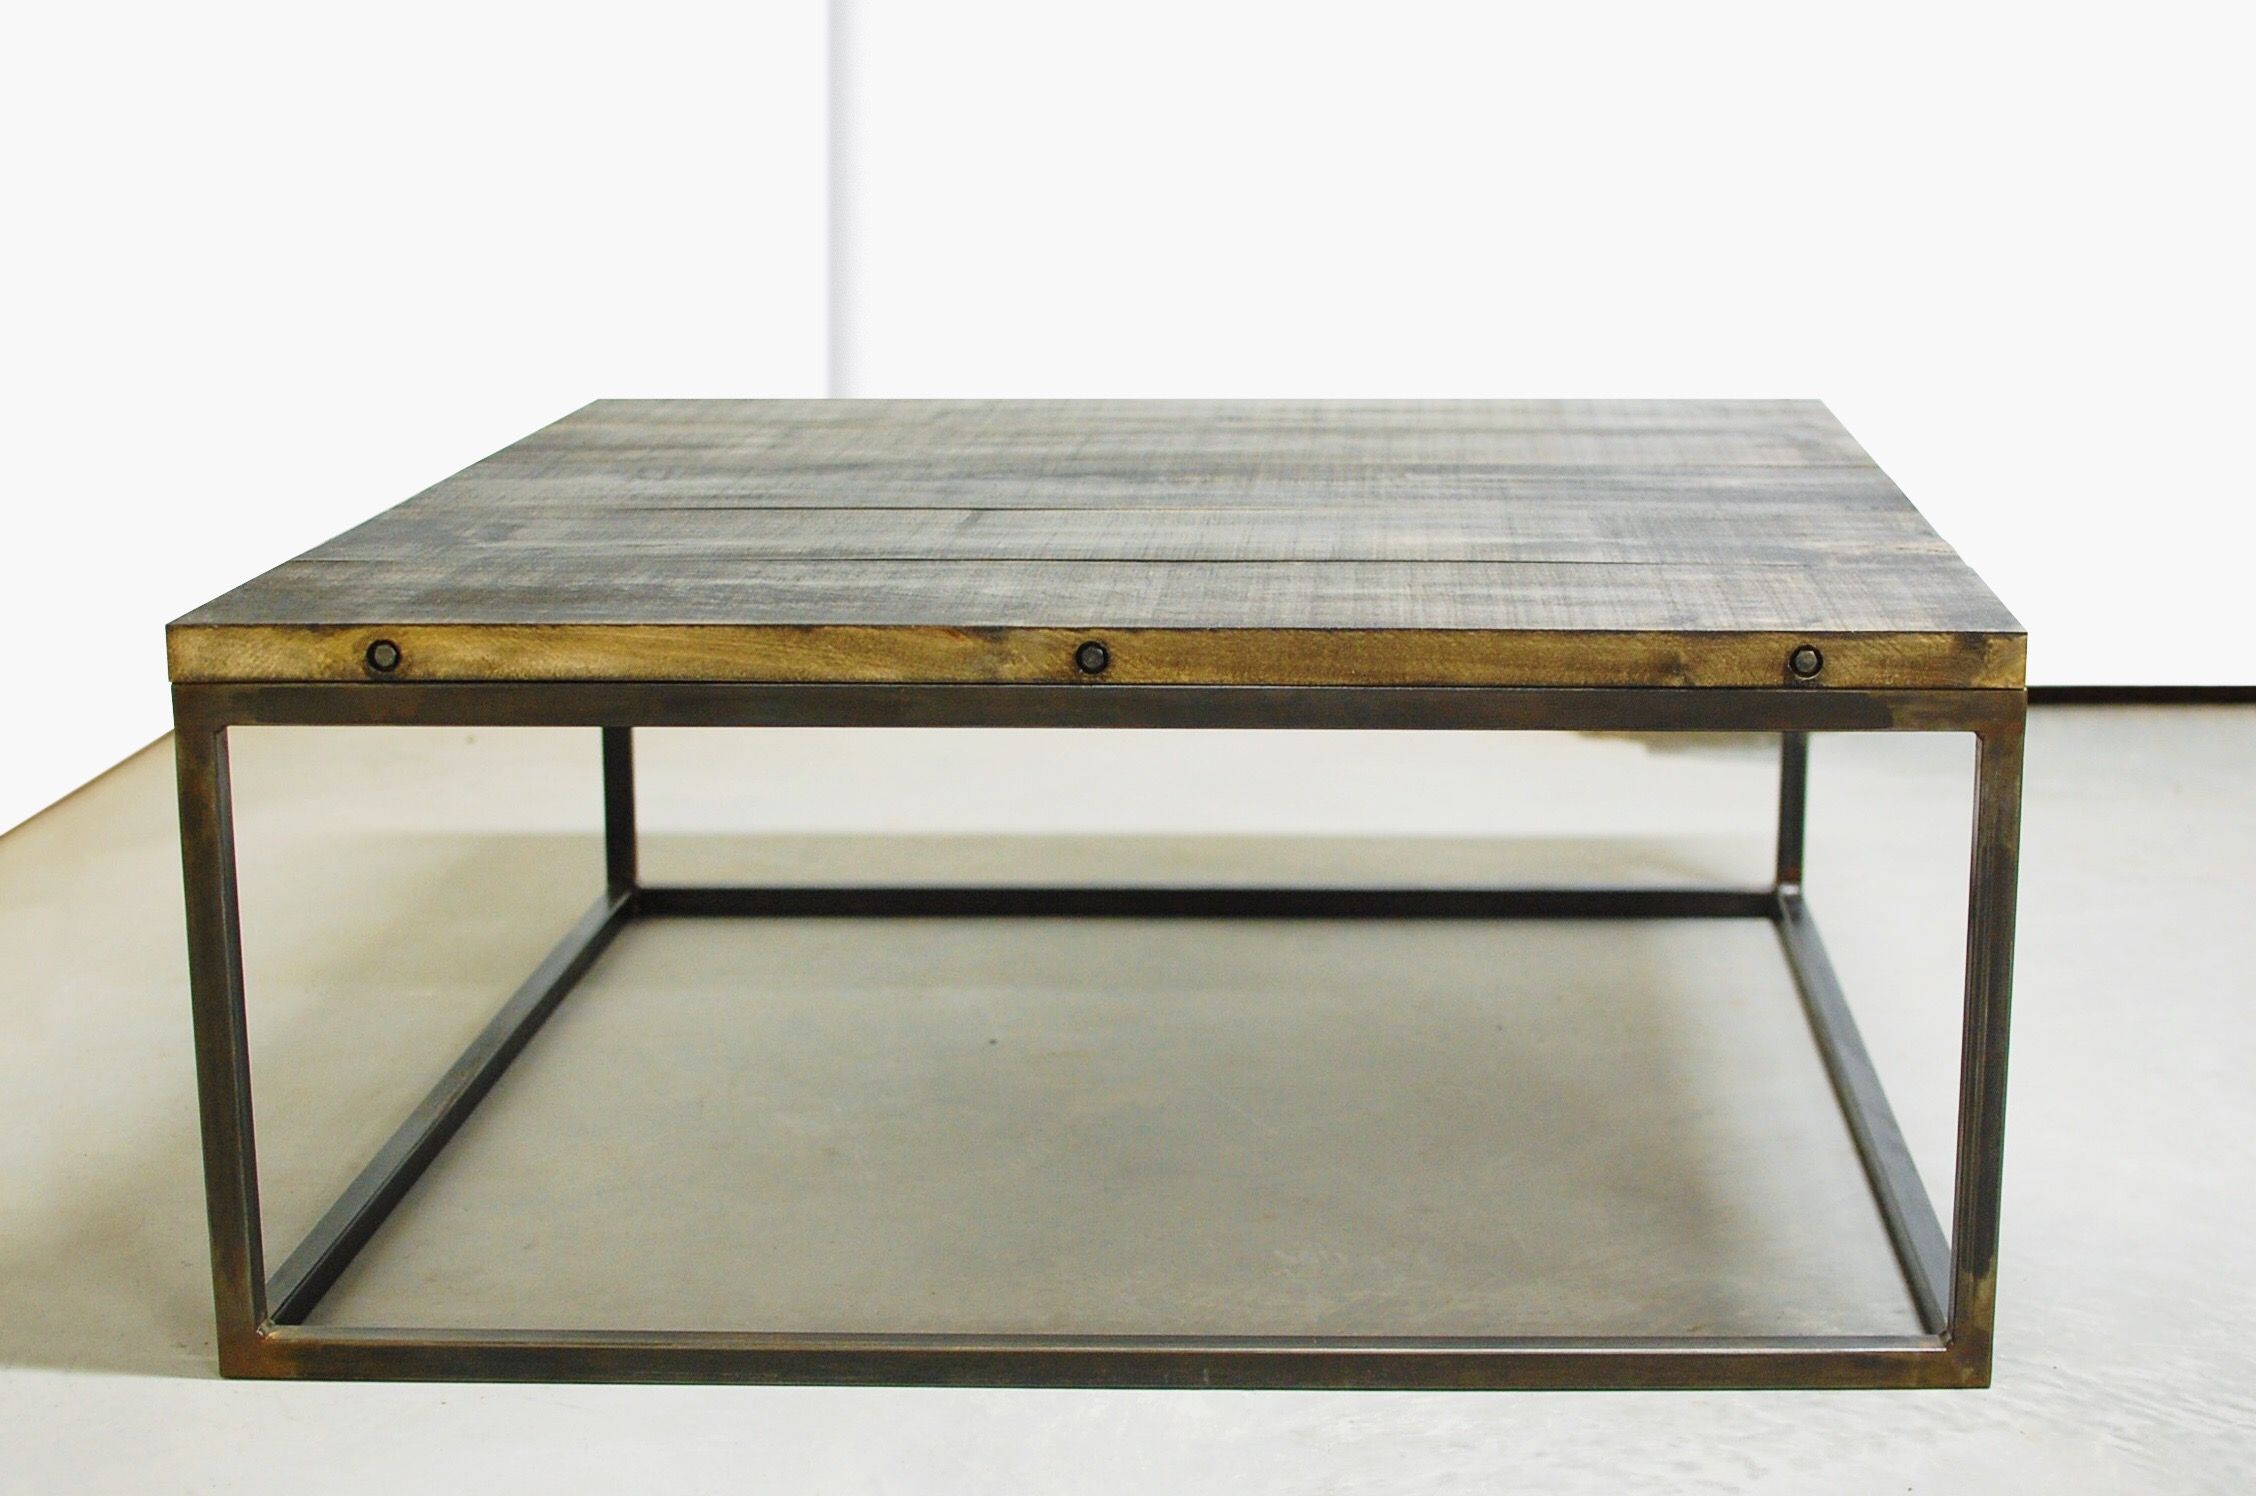 Custom Industrial Wood Coffee Table With Metal Legssouthern Sunshine |  Custommade With Coffee Tables With Metal Legs (View 8 of 15)